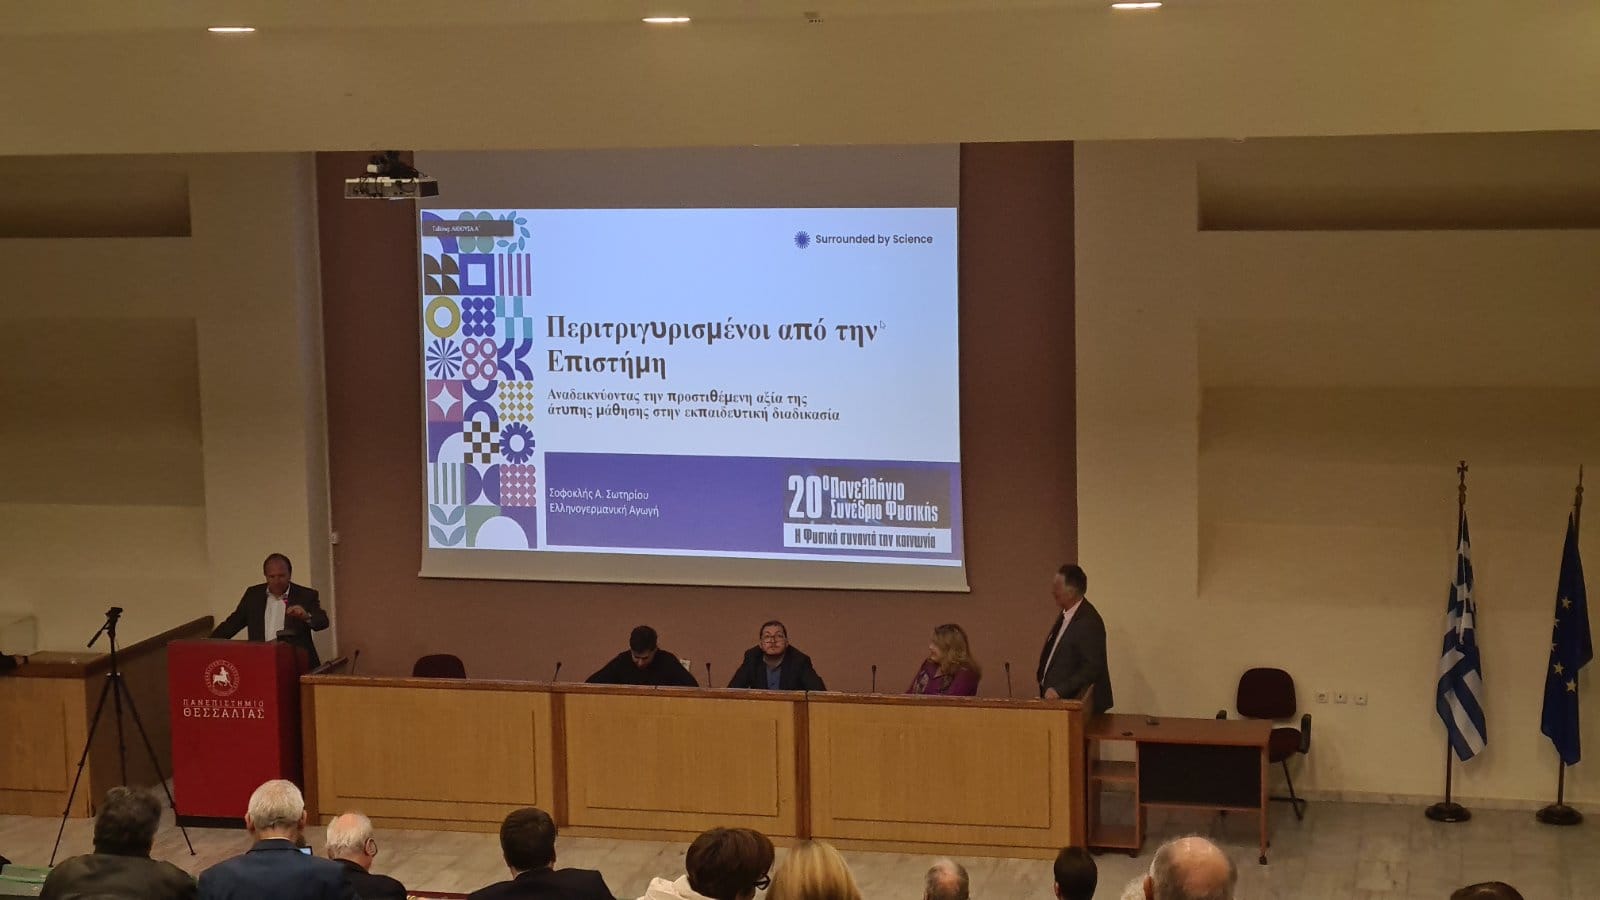 SbS being presented at the 20th National Conference of the Hellenic Physical Society